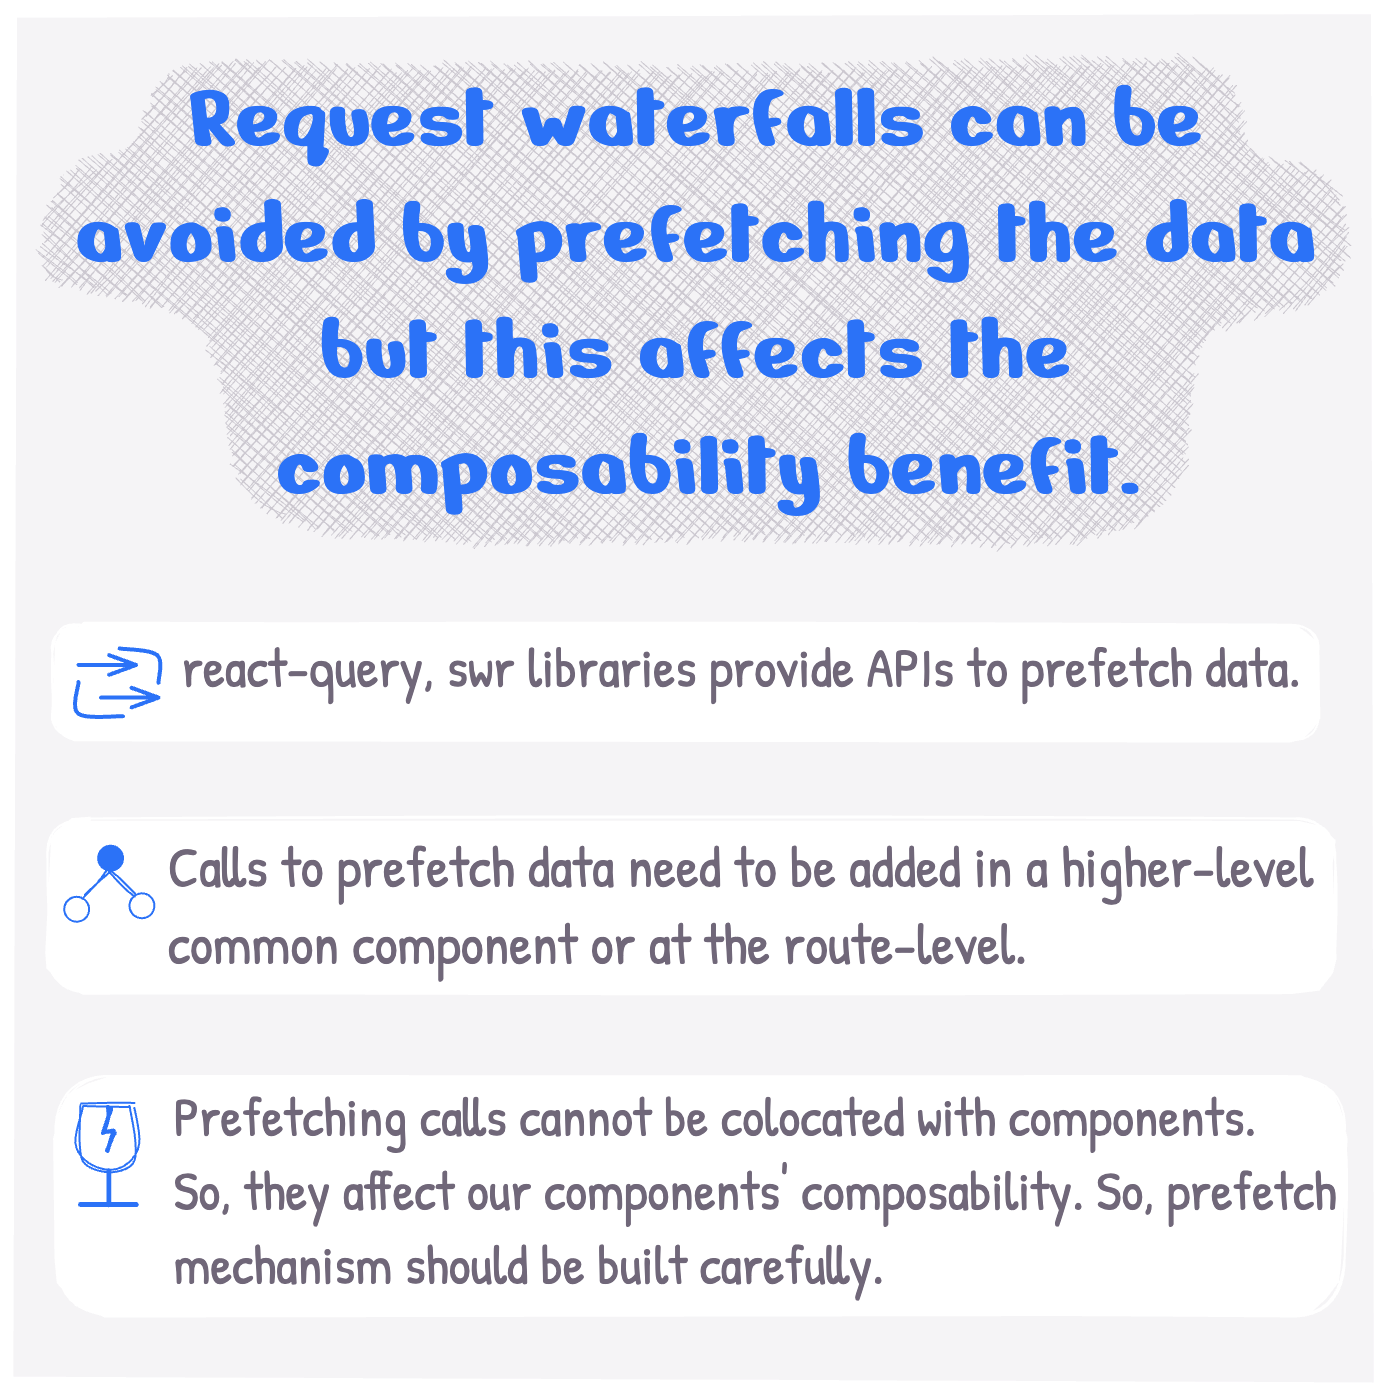 Request waterfalls can be avoided by prefetching the data at route level. But building maintainable mechanisms to do can be complicated